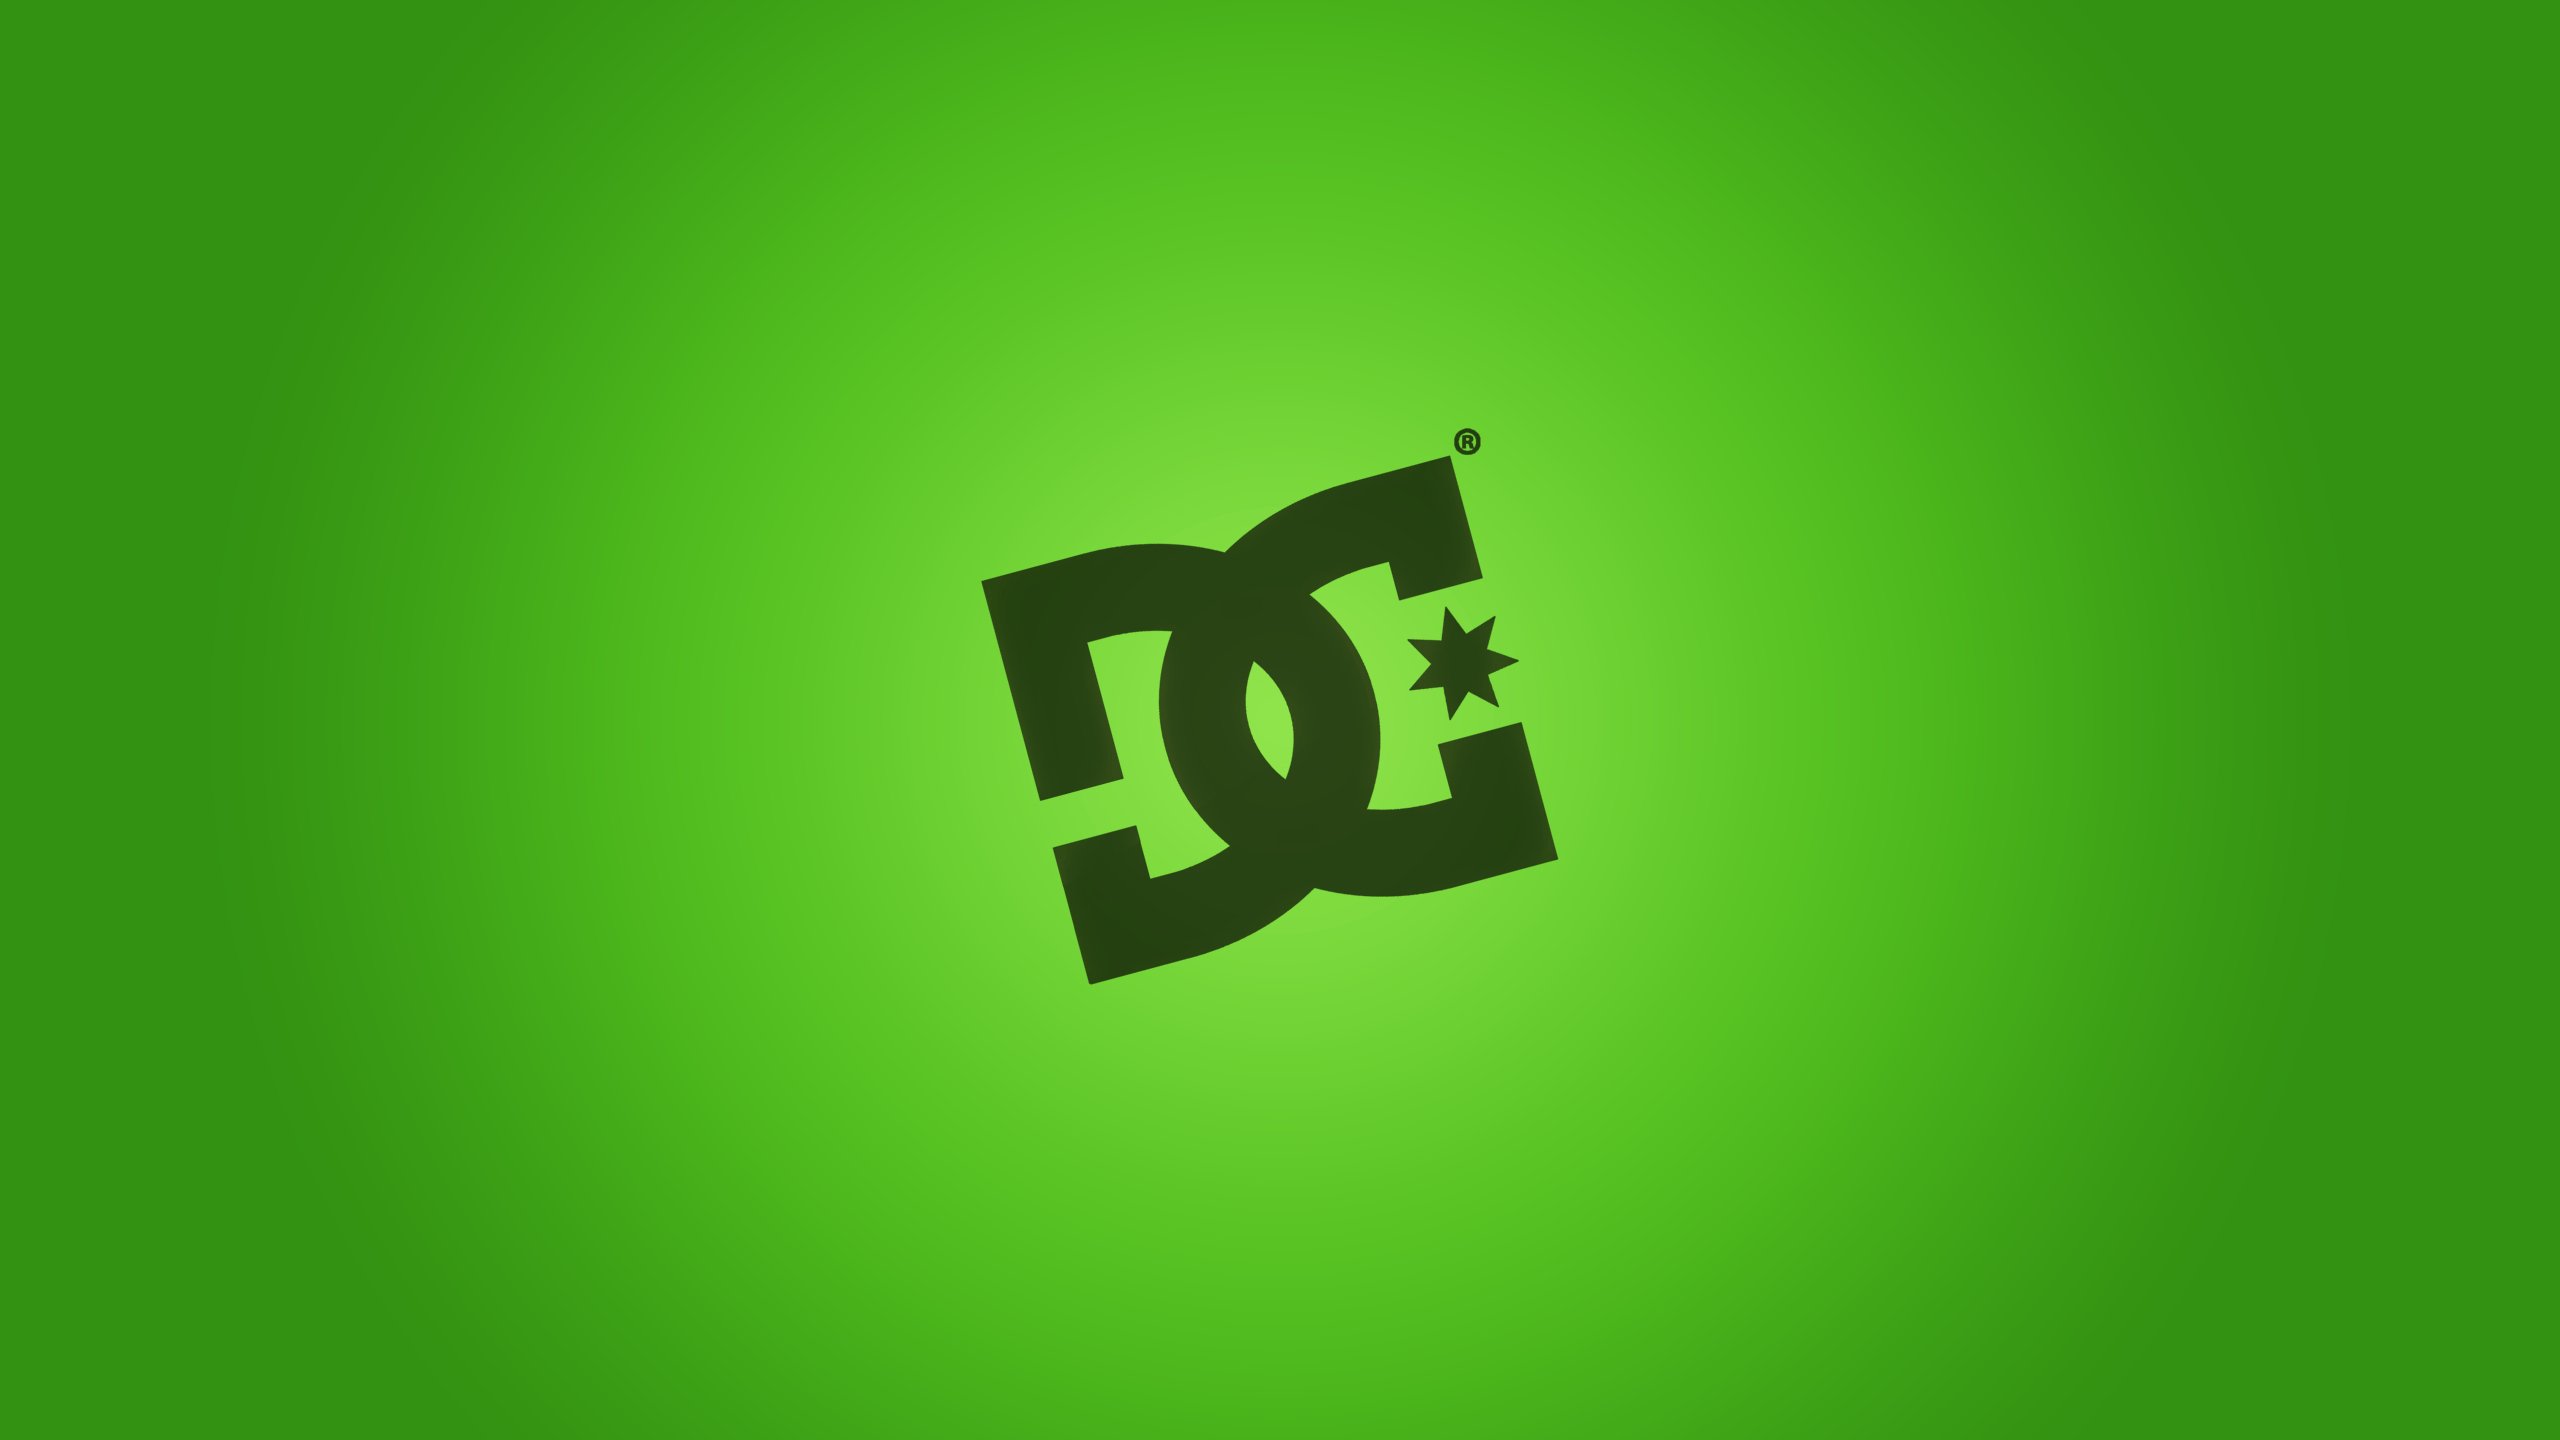 Green Background And Wallpaper DC Shoes Logo. Logo's